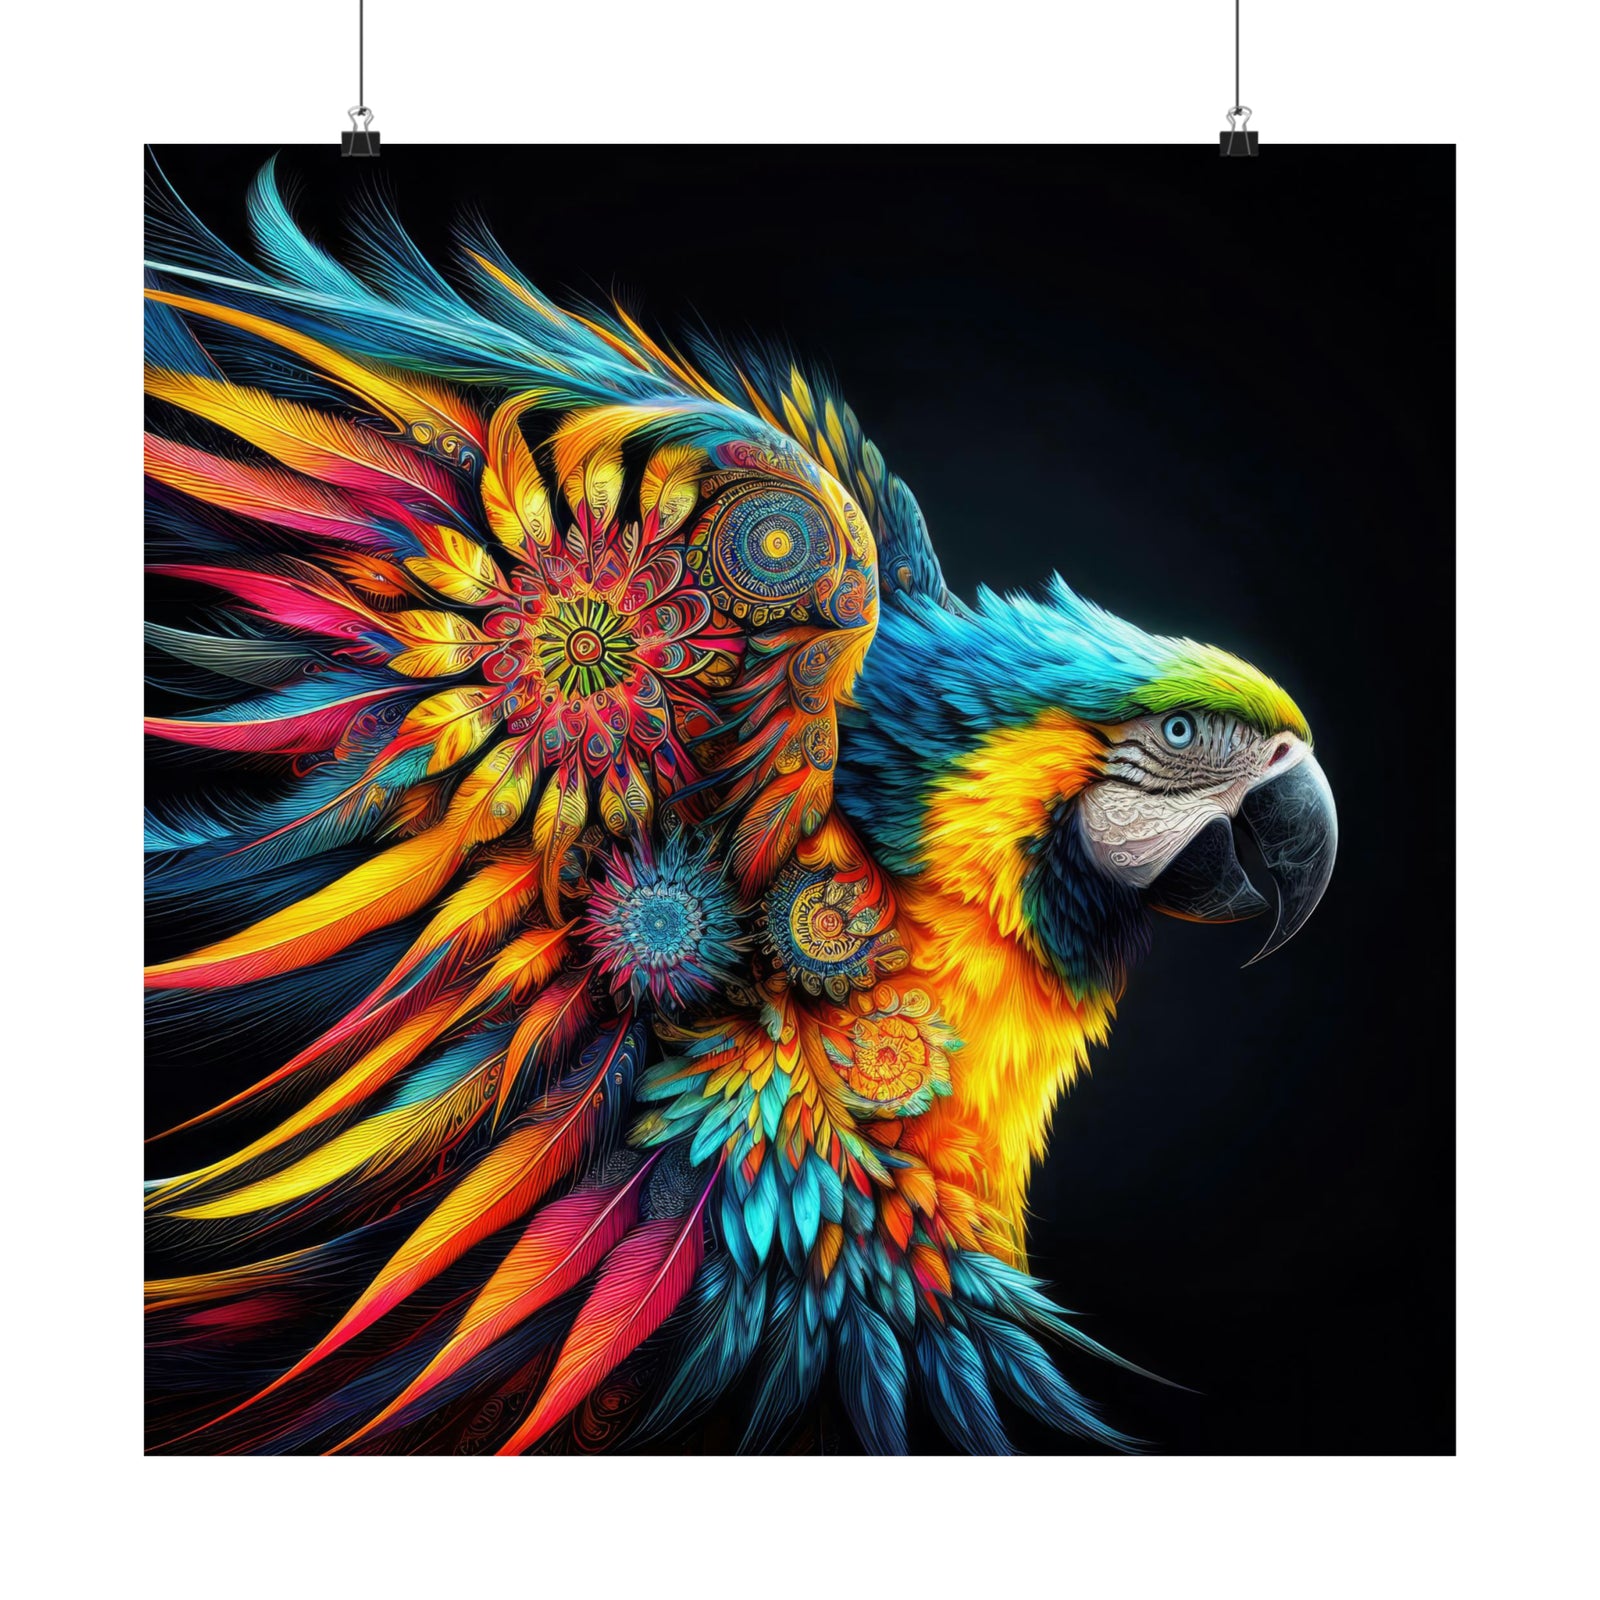 The Artistic Macaw Poster